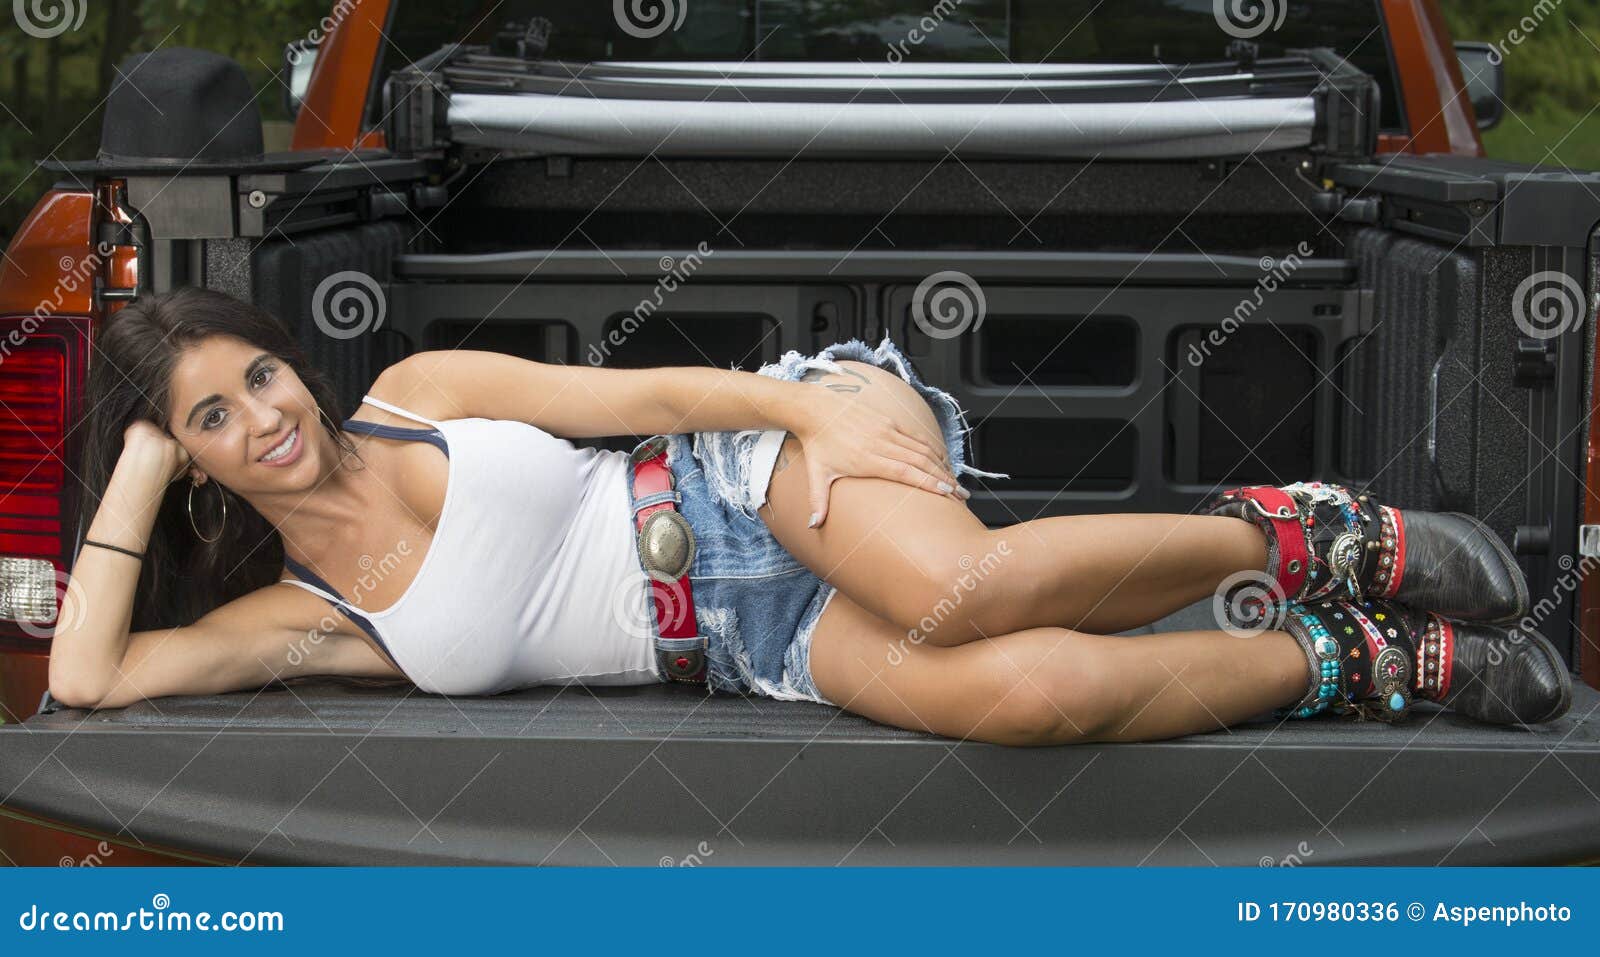 sexy wife in truck bed pics